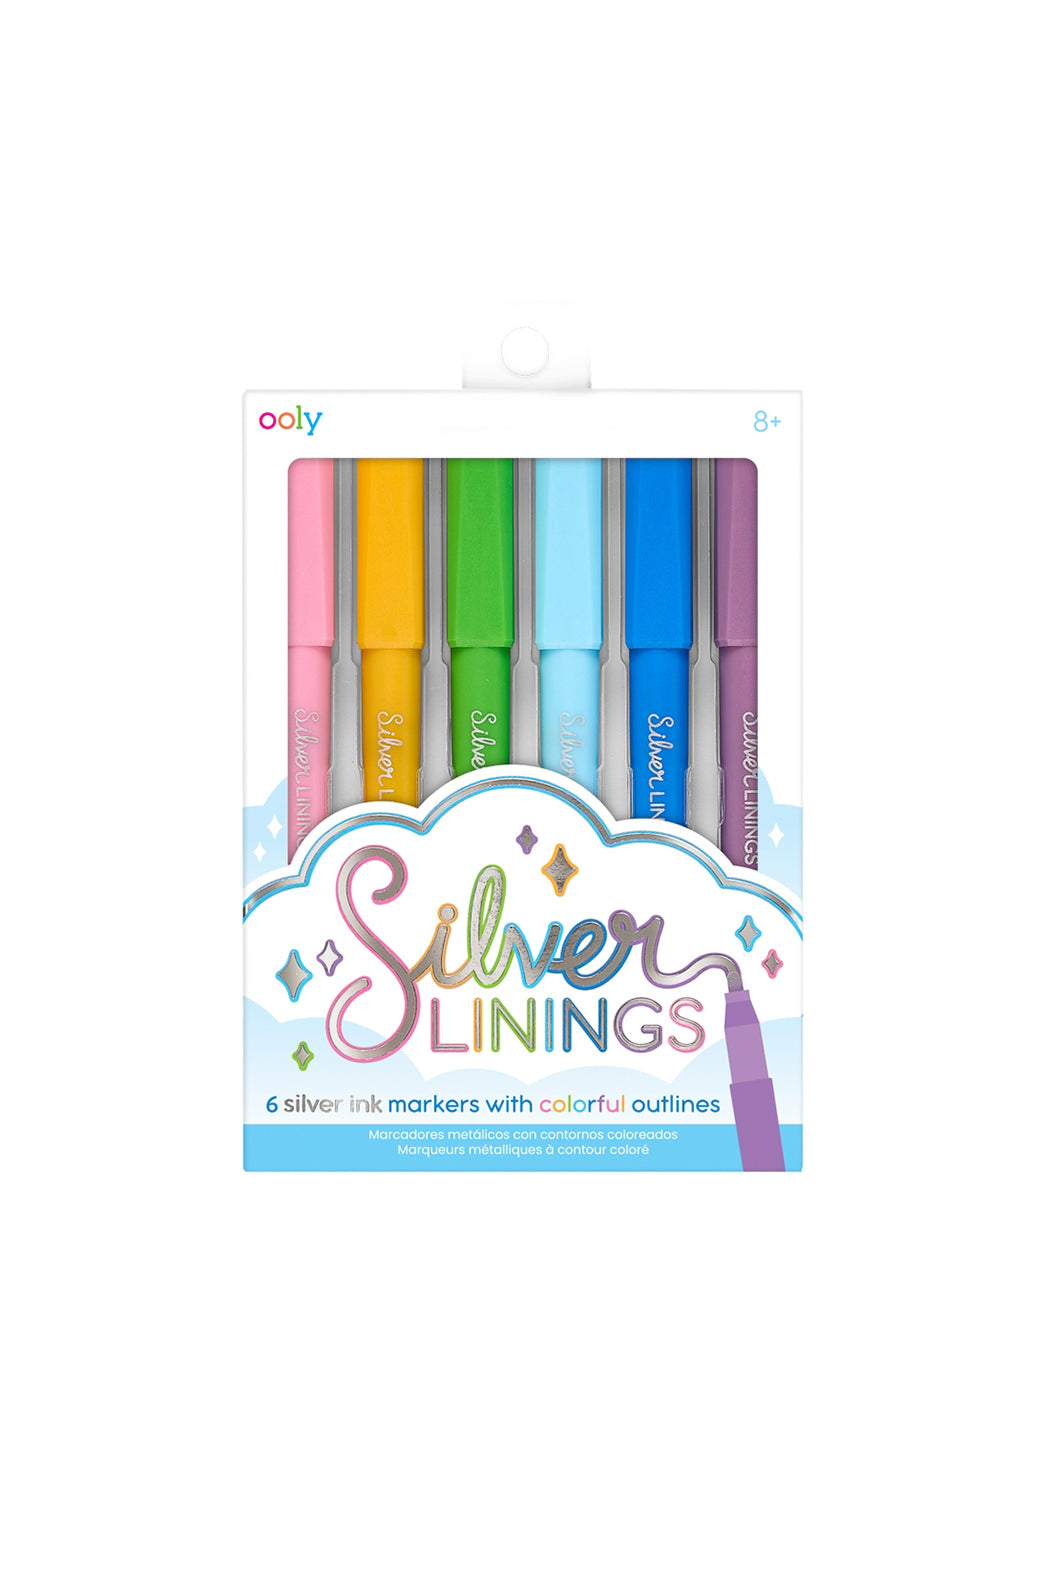 Ooly Silver Linings Outline Markers - Set Of 6